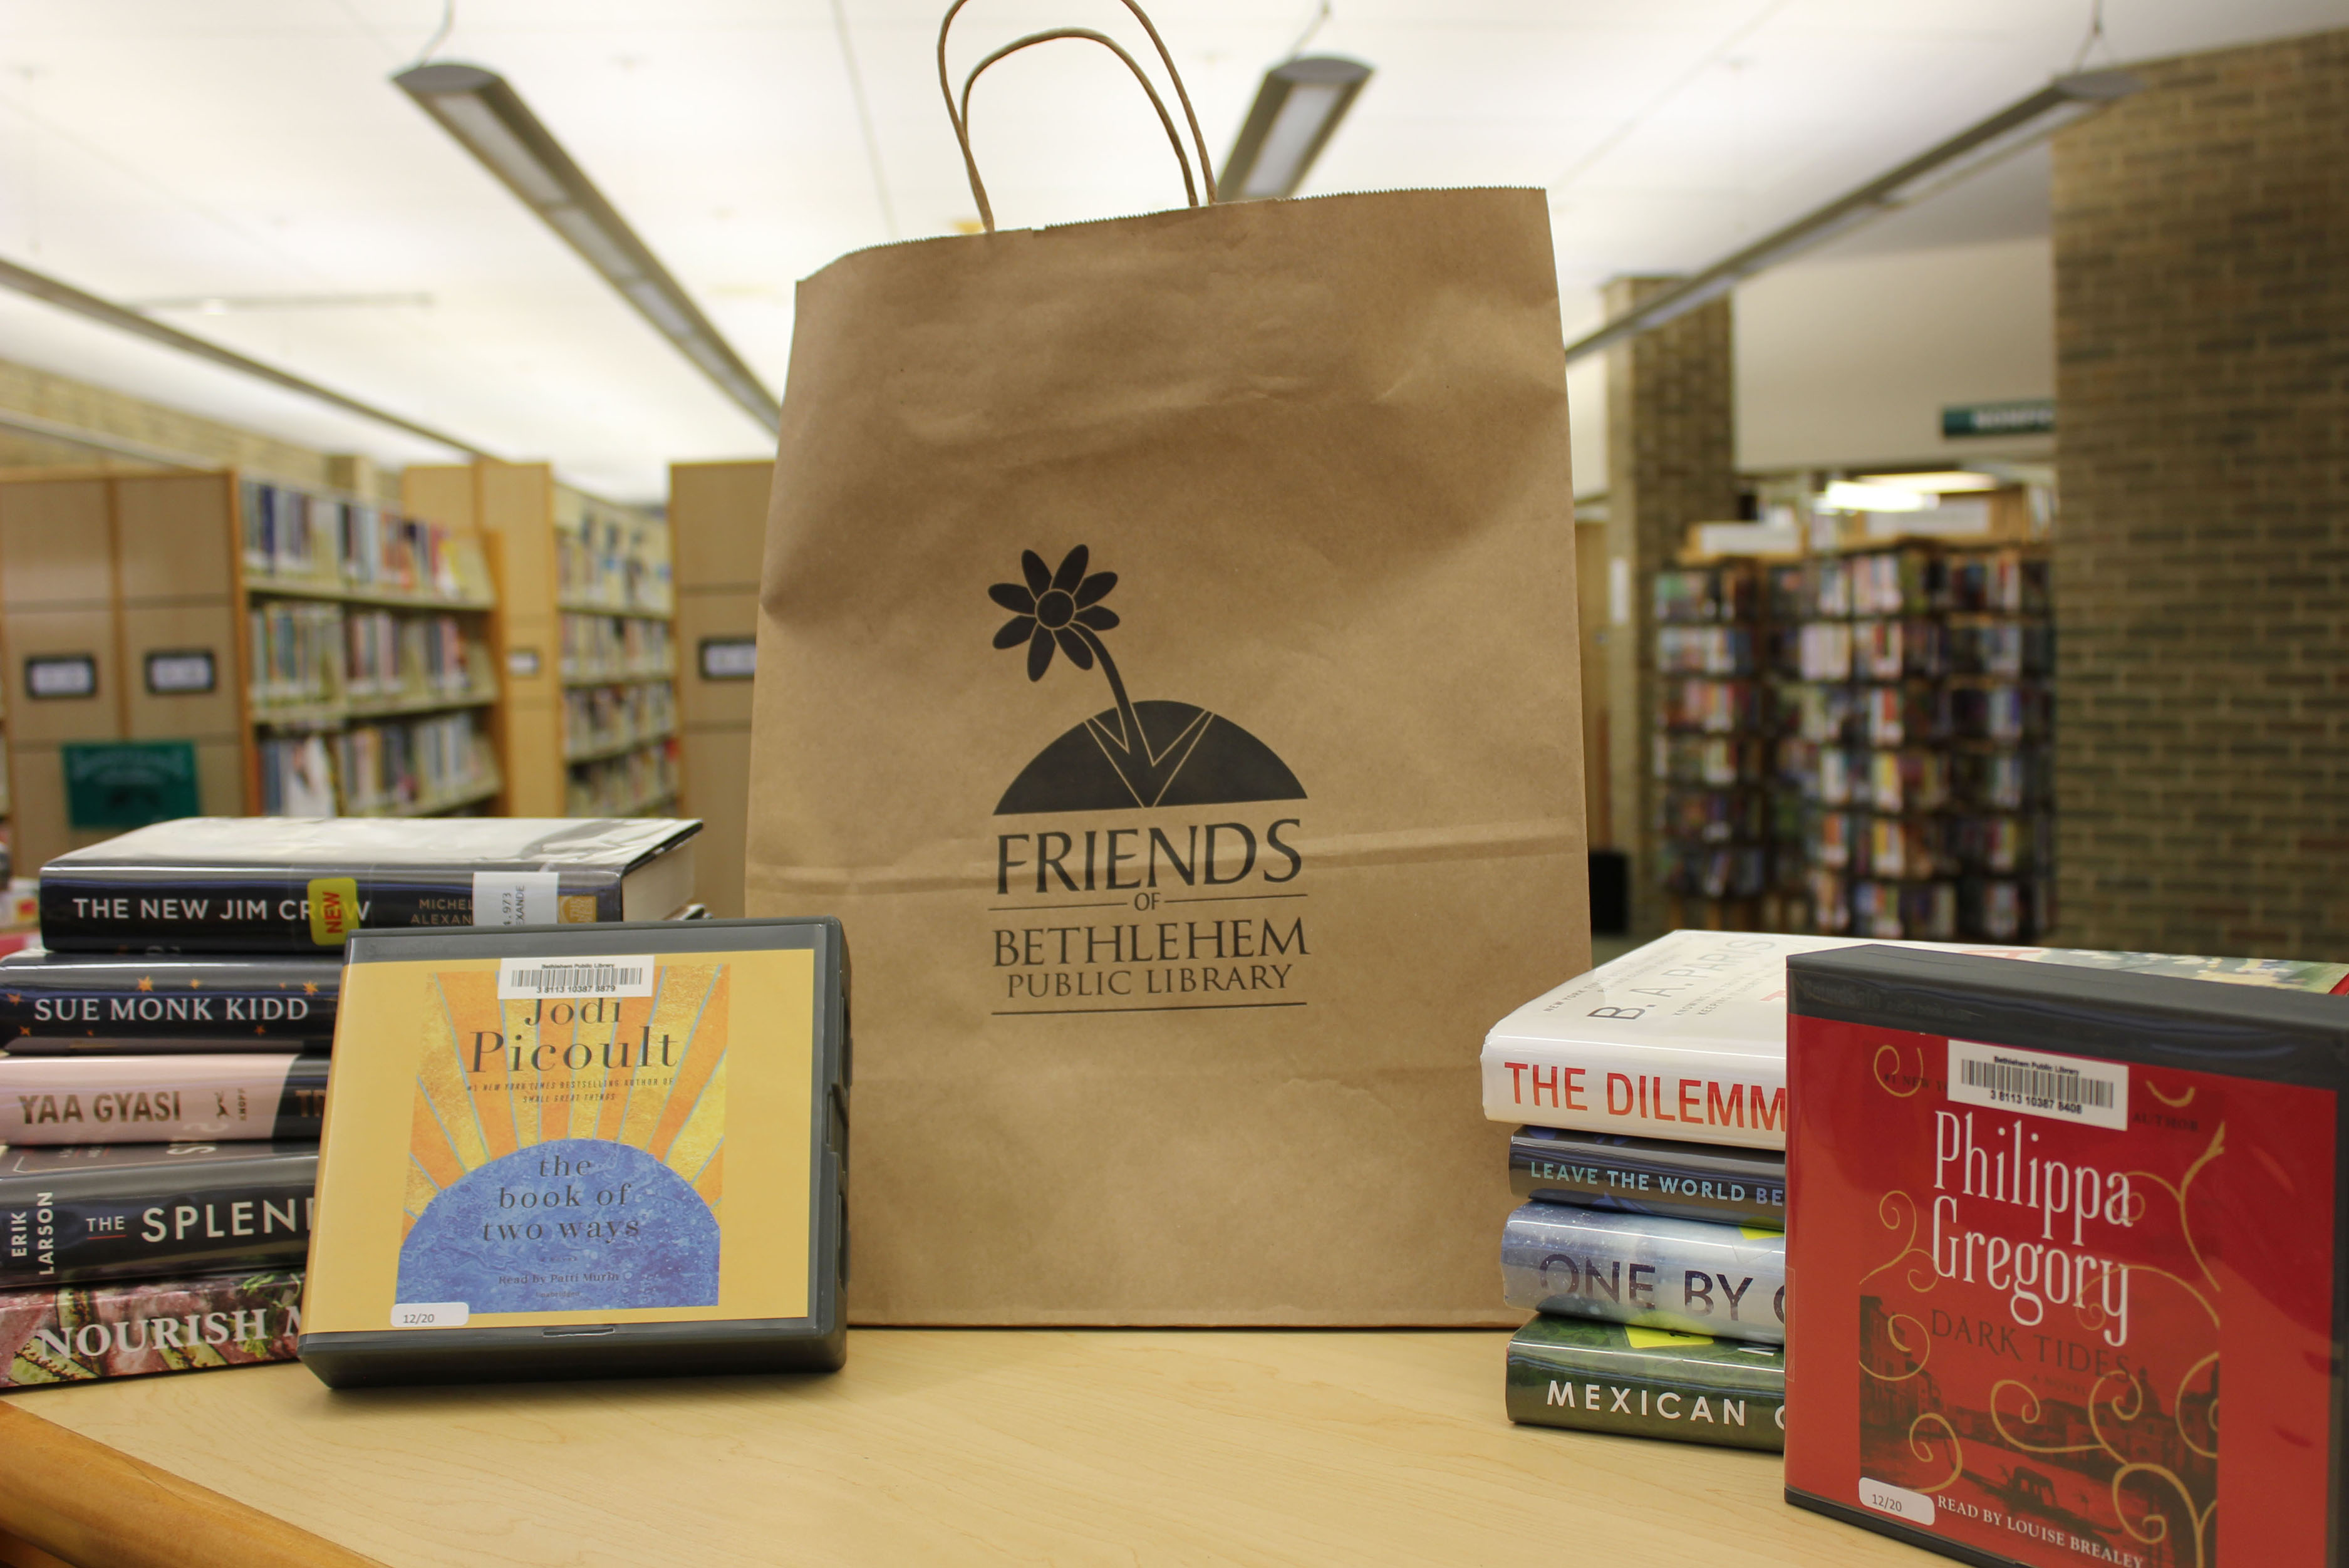 Book Bundles Reimagine the Public Library Browsing Experience